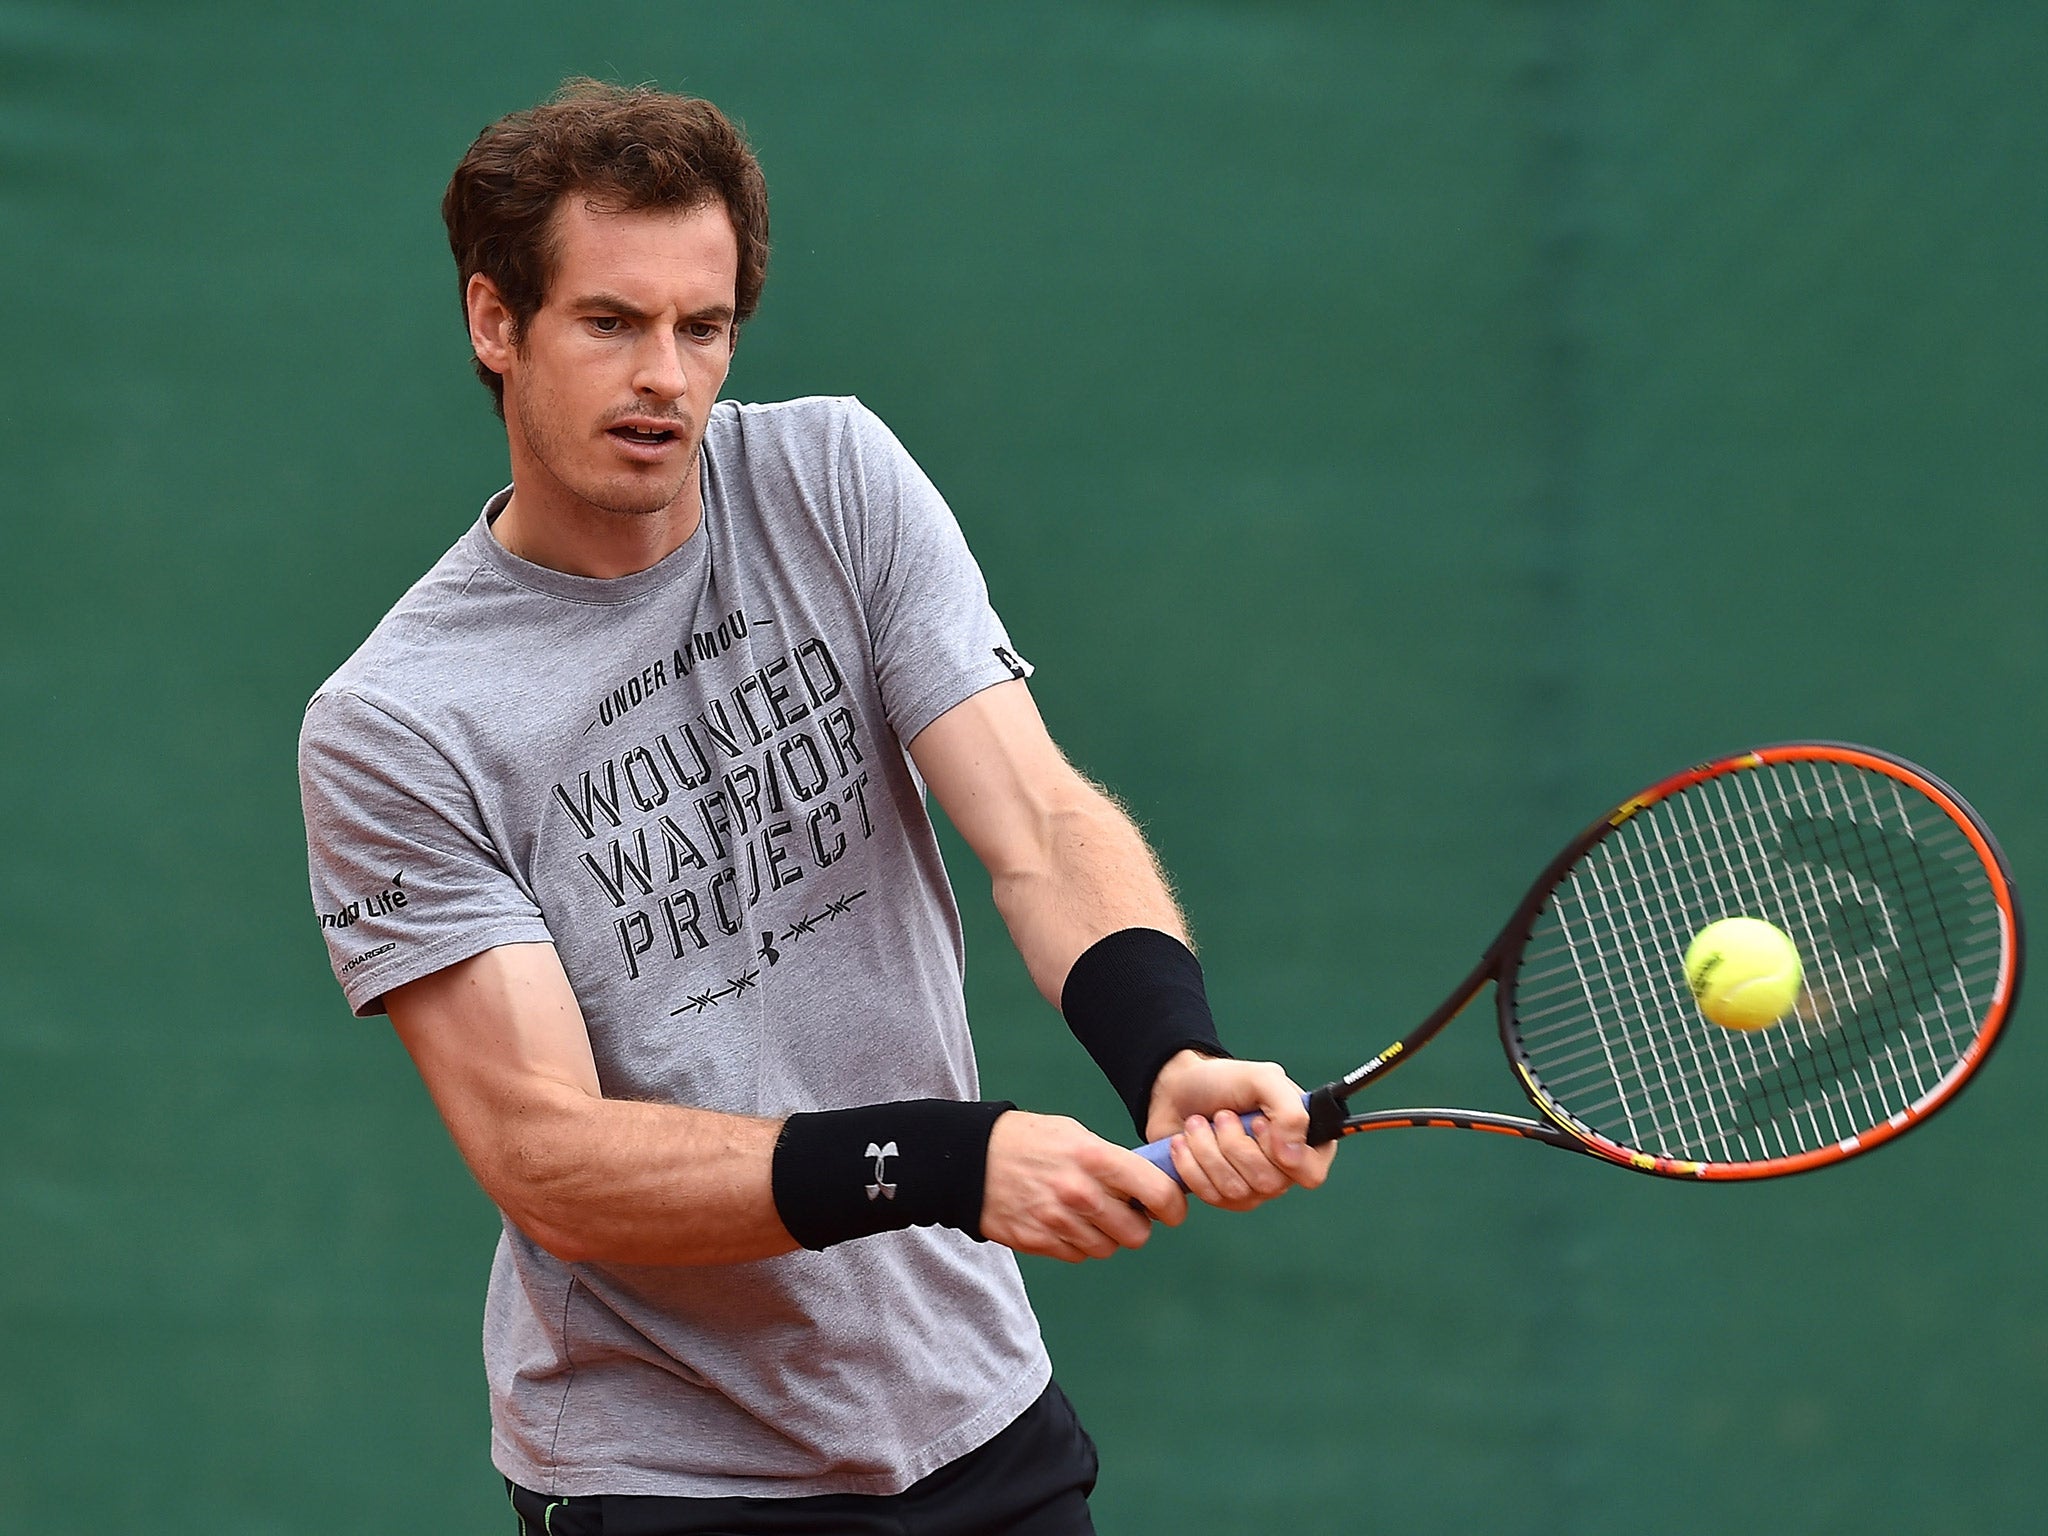 Andy Murray received a bye in the first round at the Monte Carlo Masters